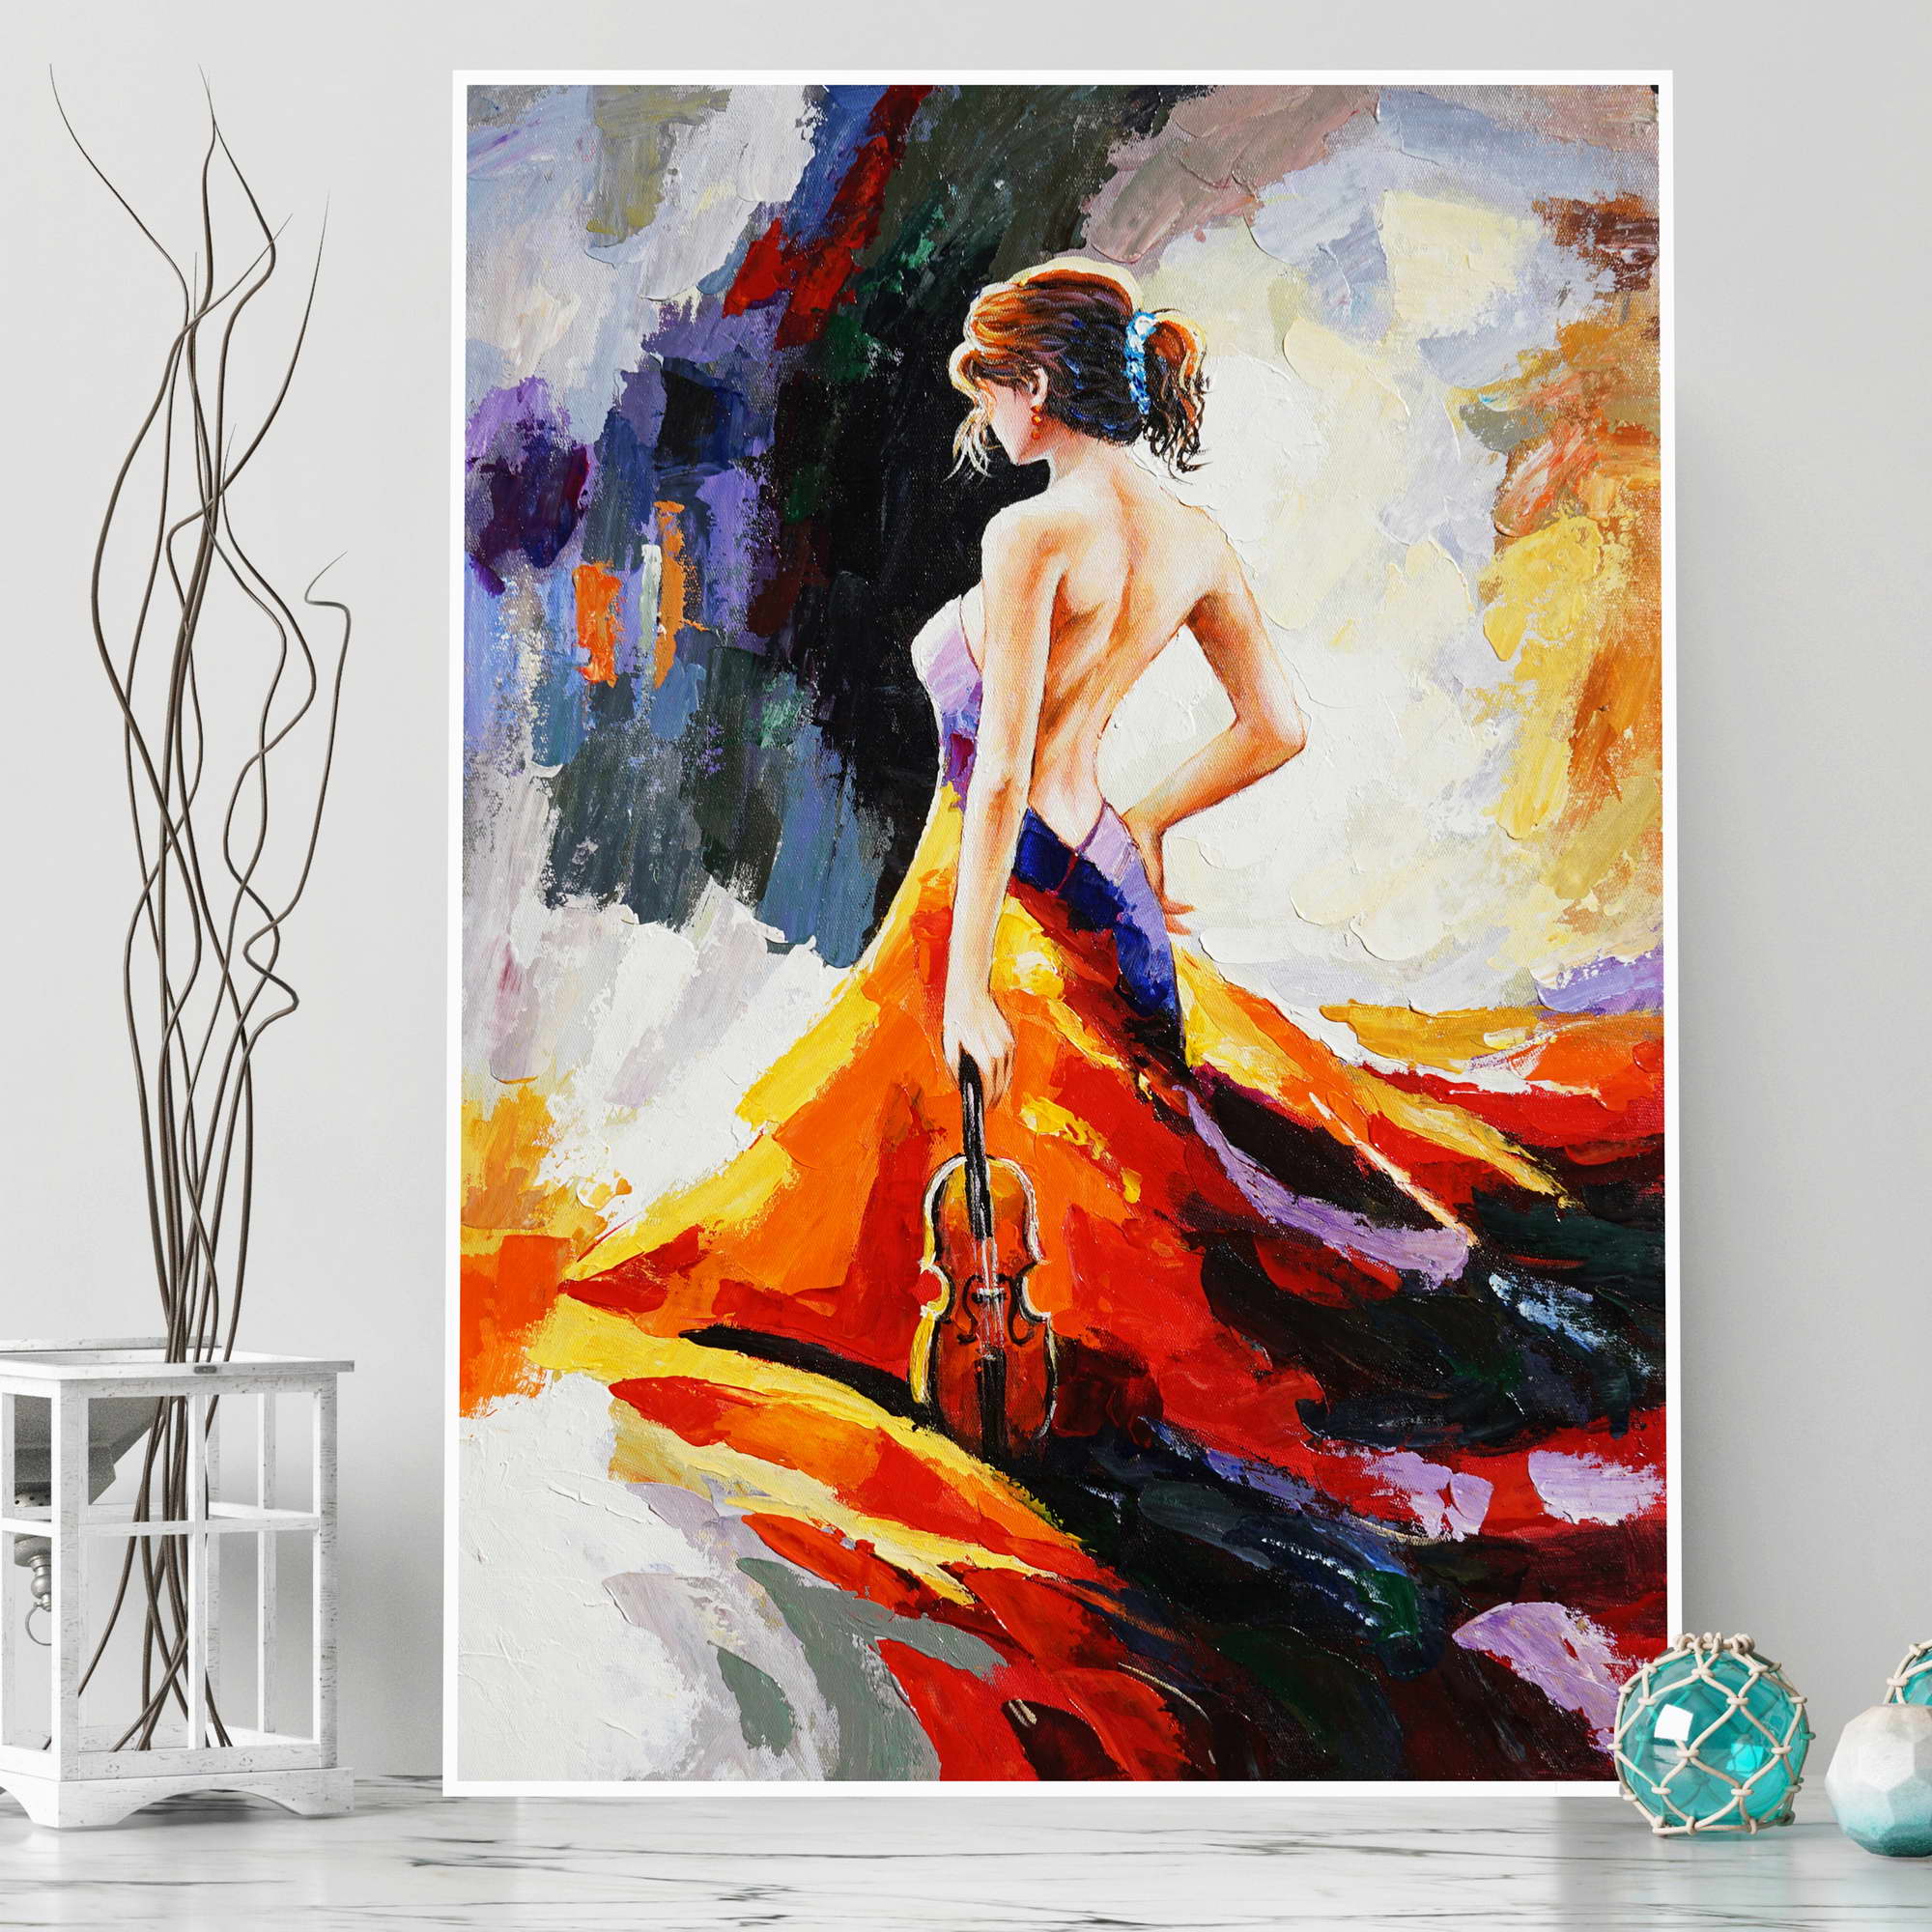 Hand painted Abstract violinist in red dress 50x70cm